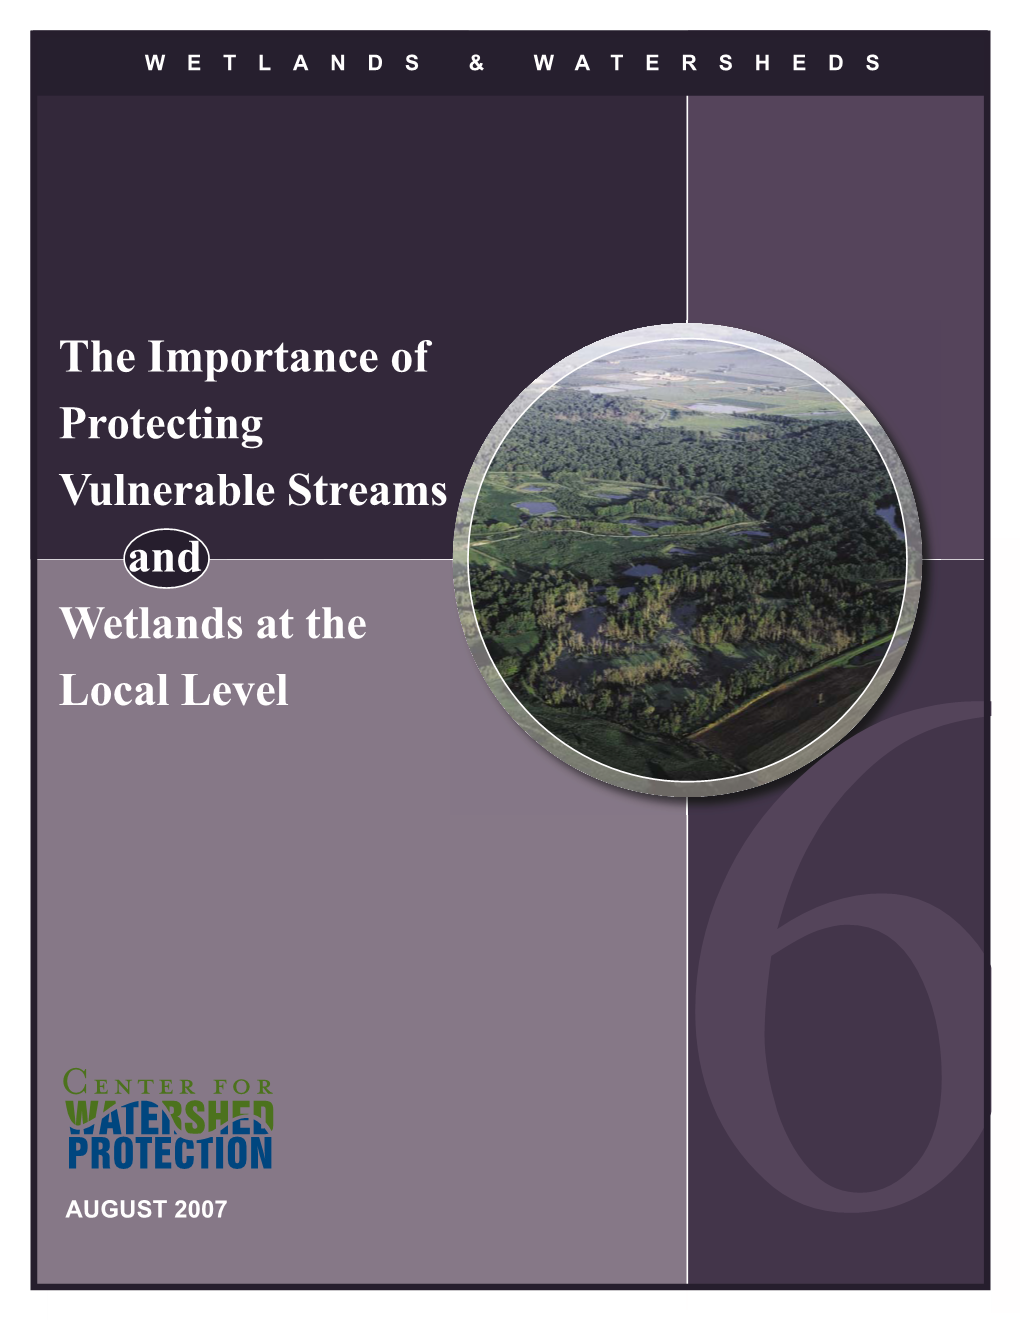 The Importance of Protecting Vulnerable Streams and Wetlands at the Local Level